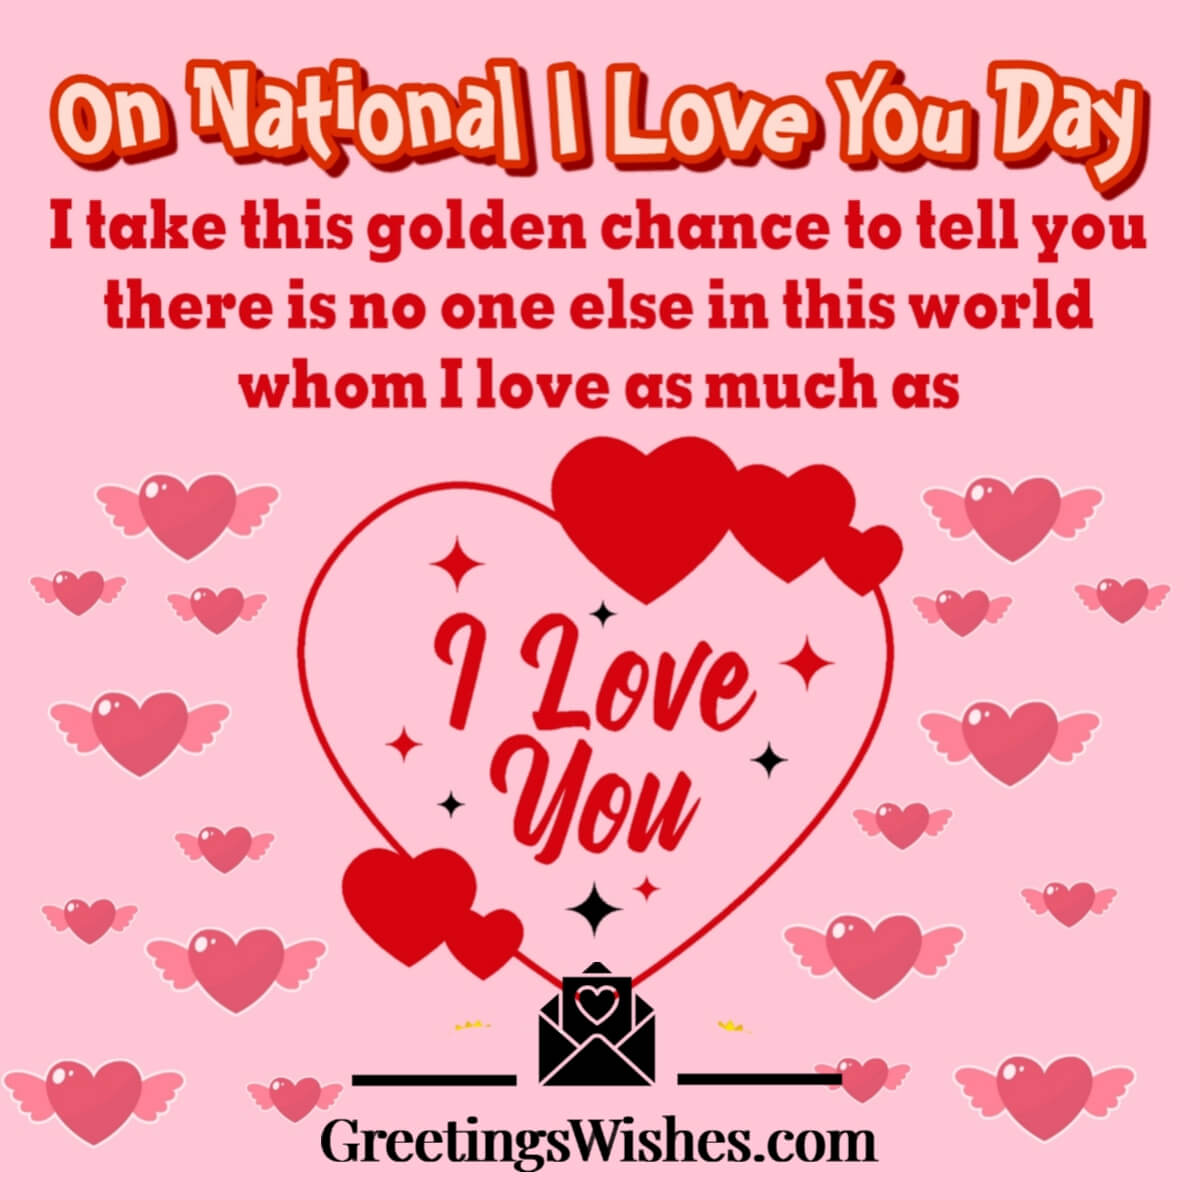 National I Love You Day Wishes